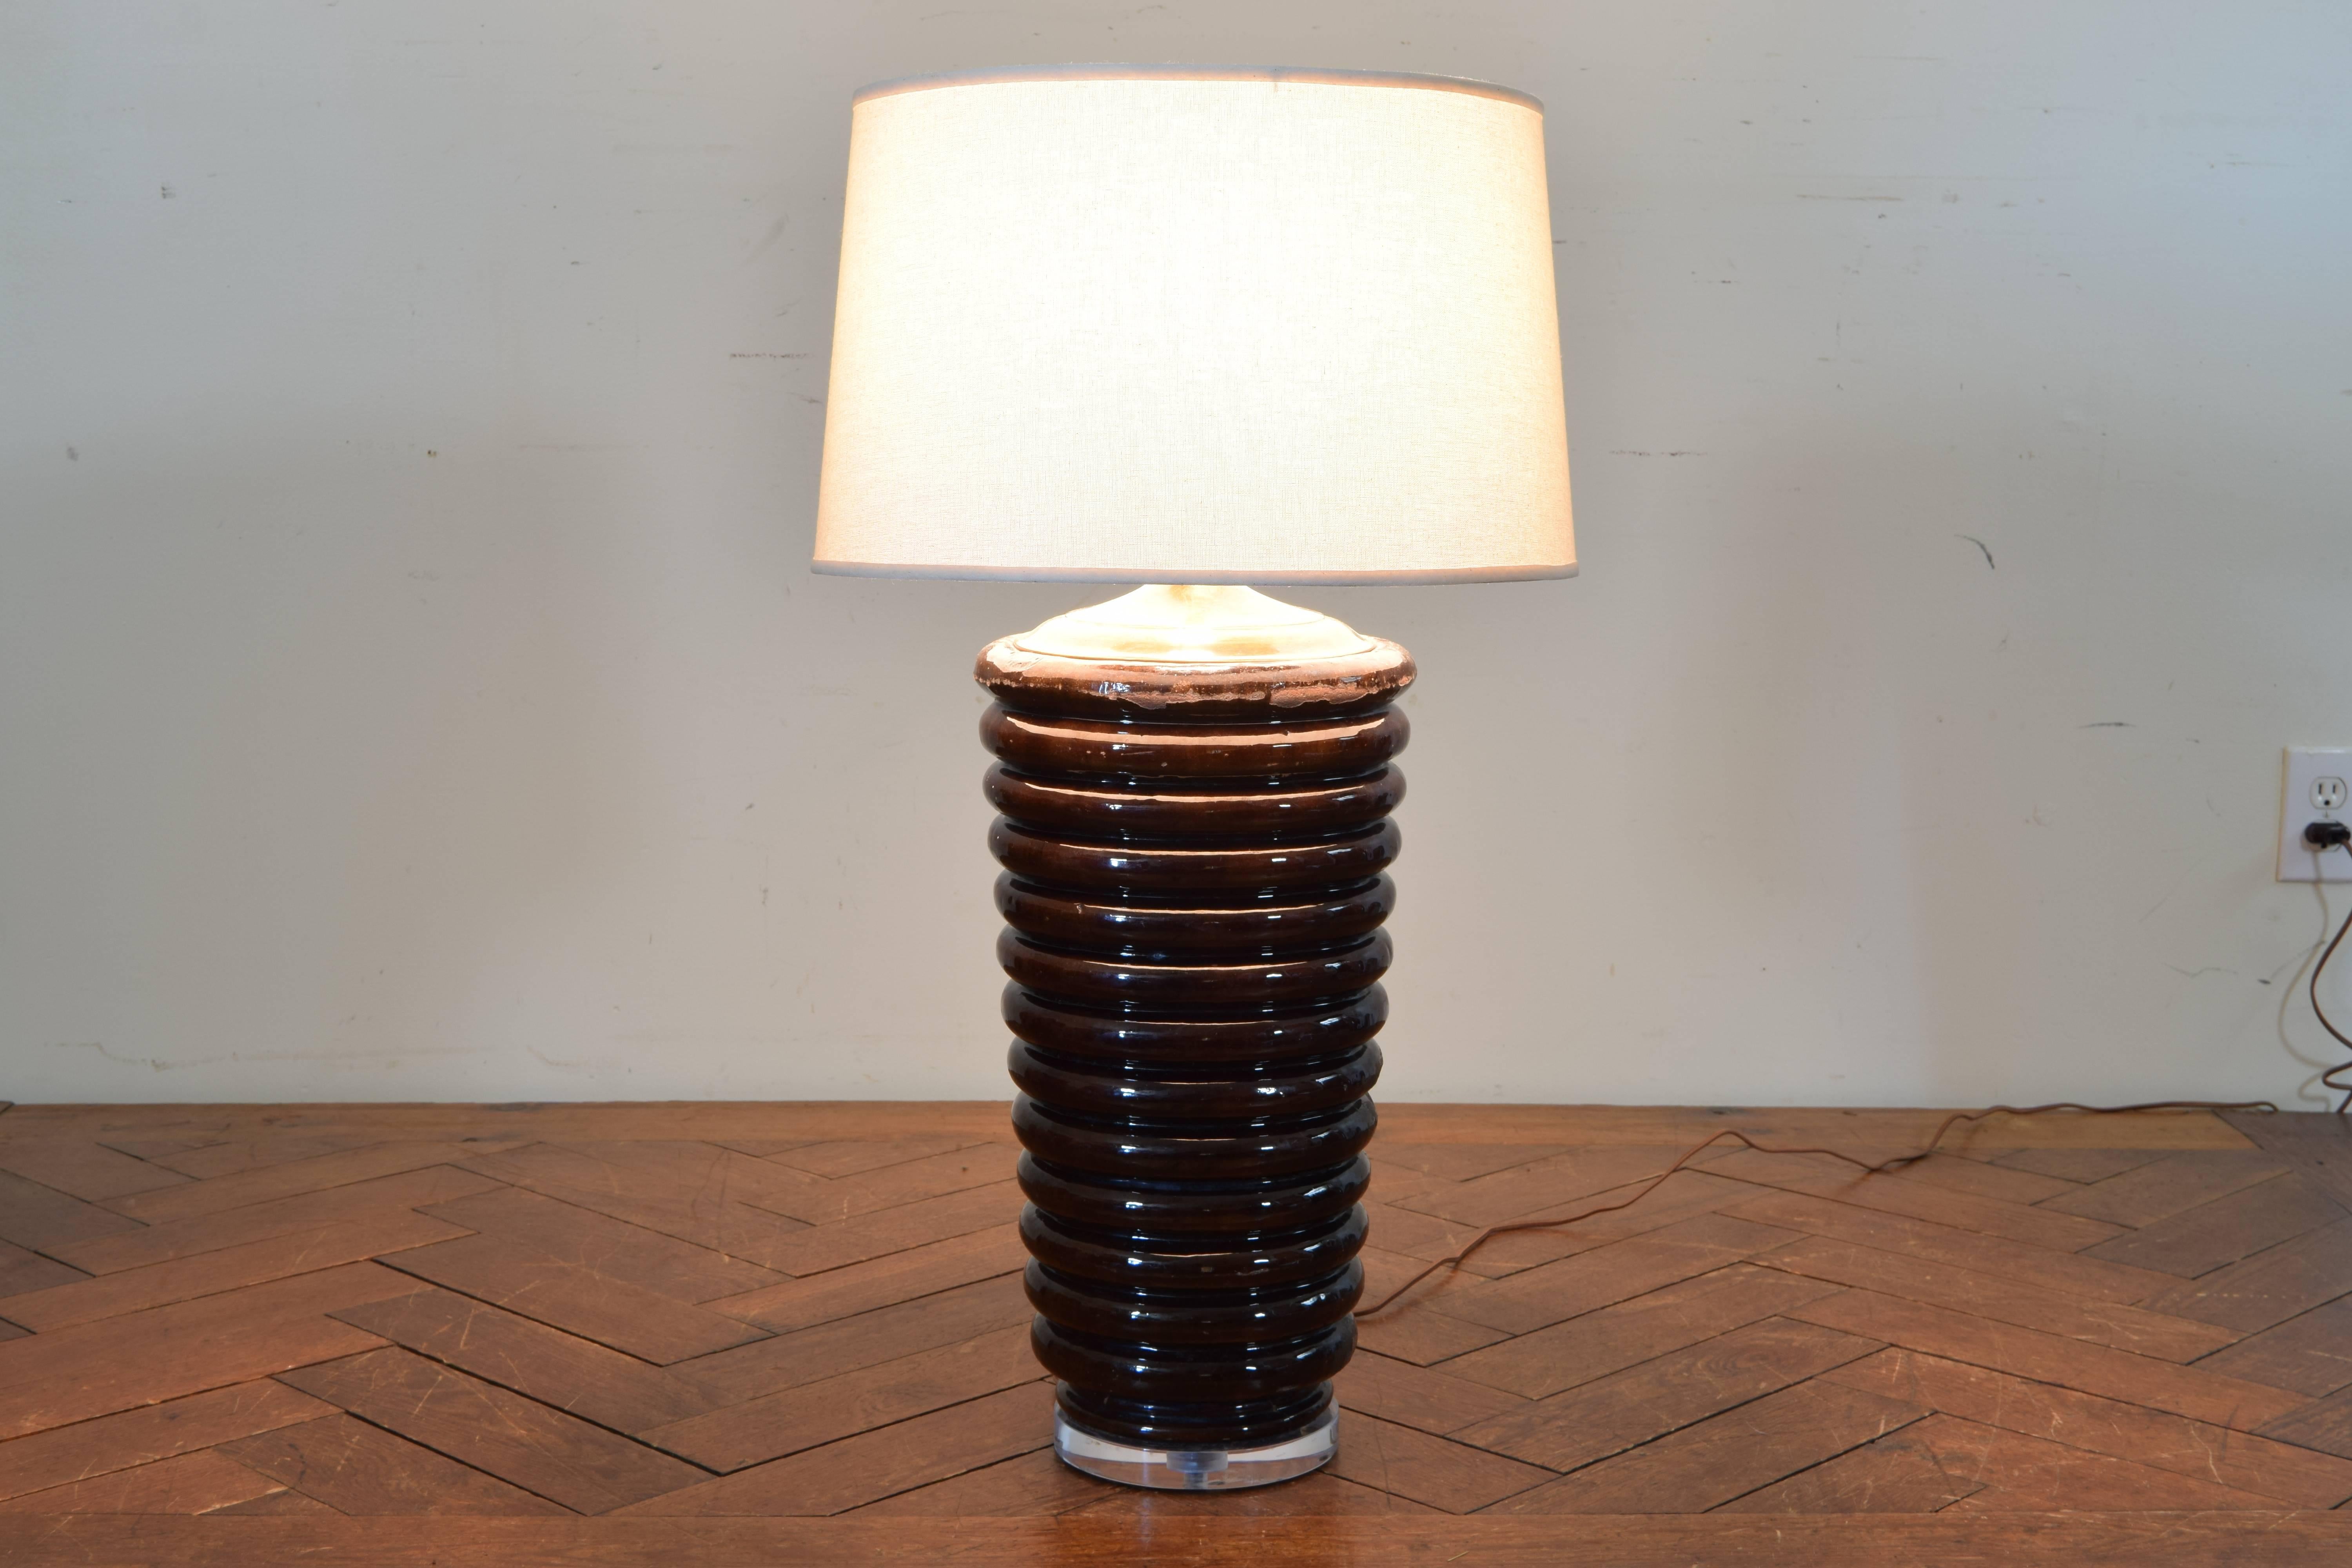 Italian, large glazed terracotta decorative vase mounted as a table lamp, 19th century. Mounted on a Lucite base.